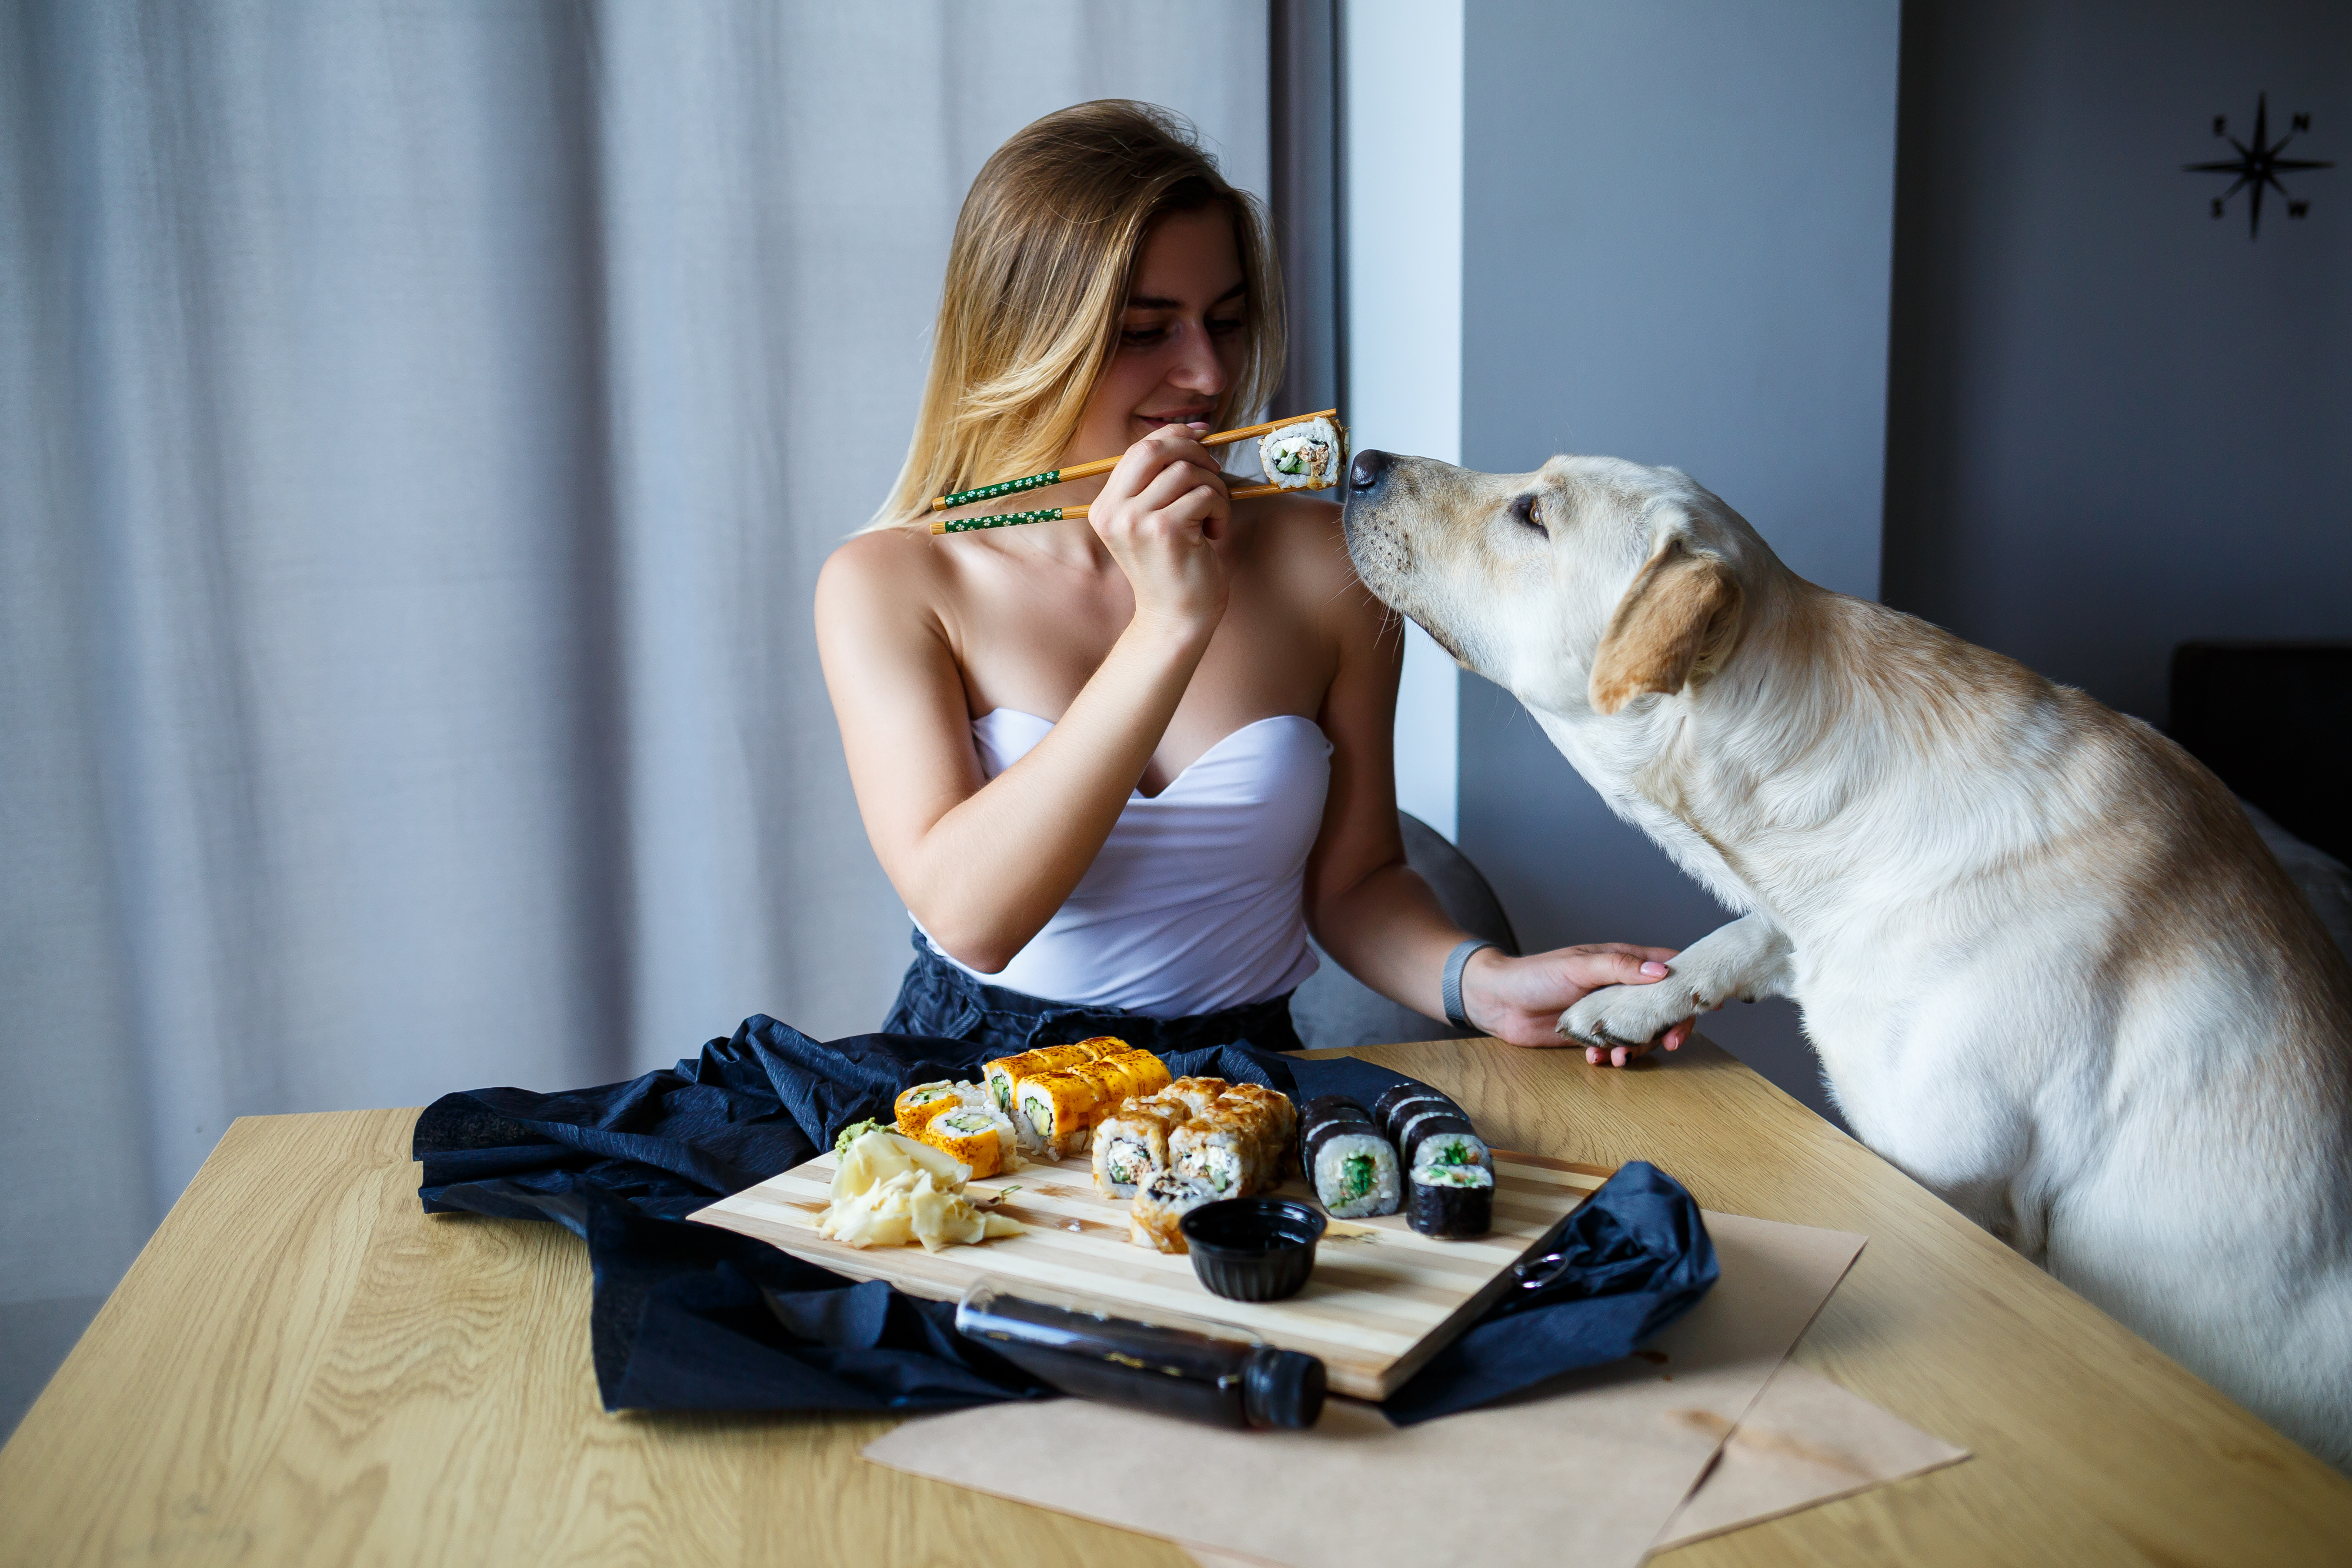 A woman holding a piece of sushi while a dog sniffs it. | Source: Shutterstock